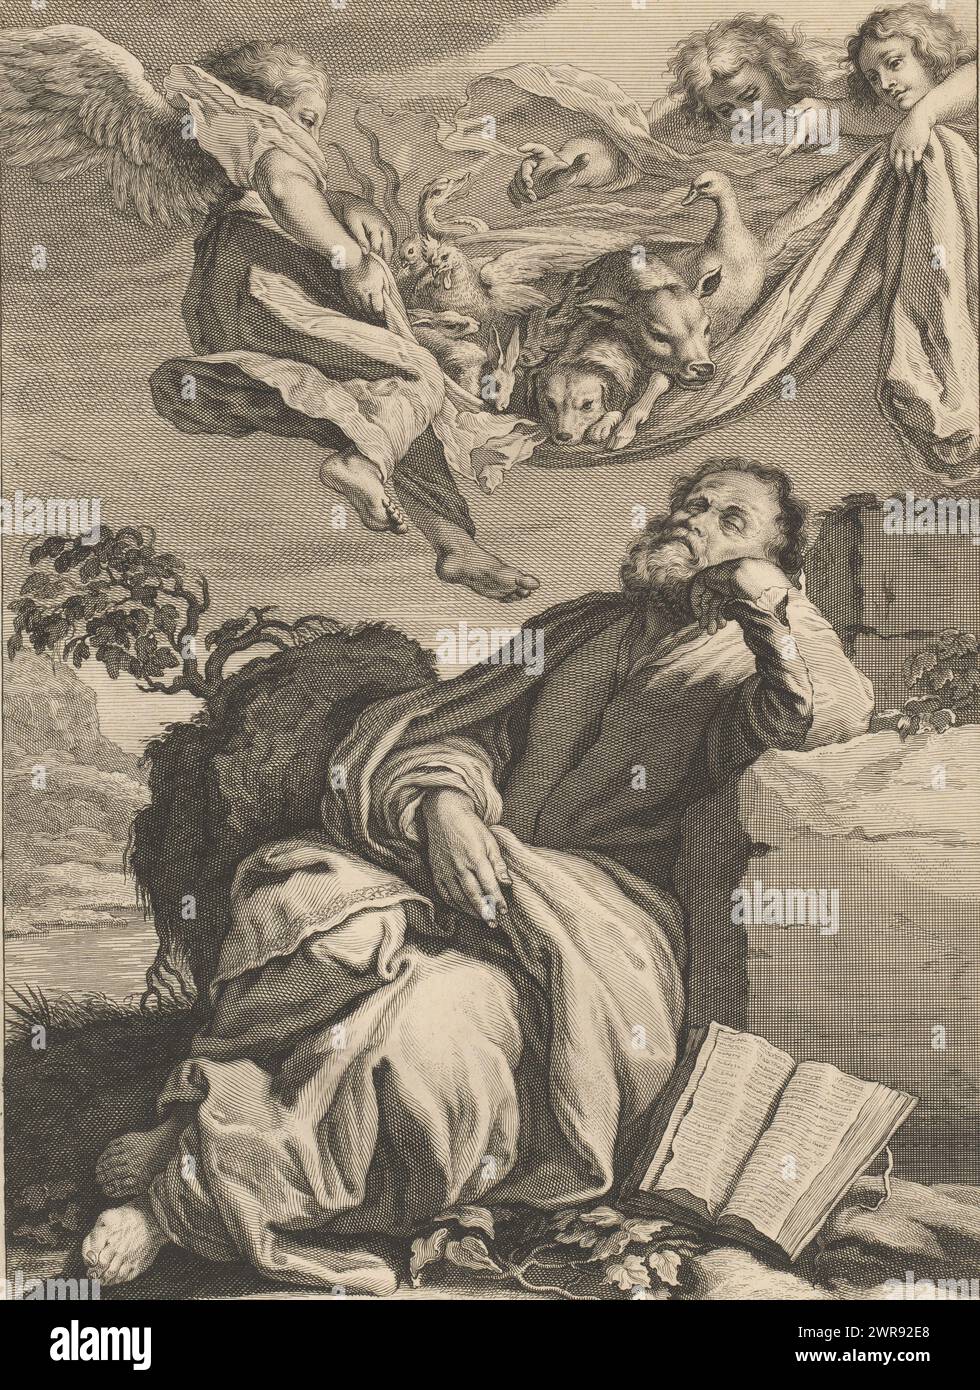 Vision of Peter, Caelaturae (series title), In a mountainous landscape, Peter sleeps against a rock. Next to him lies an open book and above him three angels hold a sheet with all kinds of unclean animals on it., print maker: Jeremias Falck, after painting by: Domenico Feti, after painting by: Johann Liss, (rejected attribution), print maker: Amsterdam, after painting by: Italy, after painting by: Italy, 1646 - 1658, paper, engraving, height 419 mm × width 292 mm, print Stock Photo